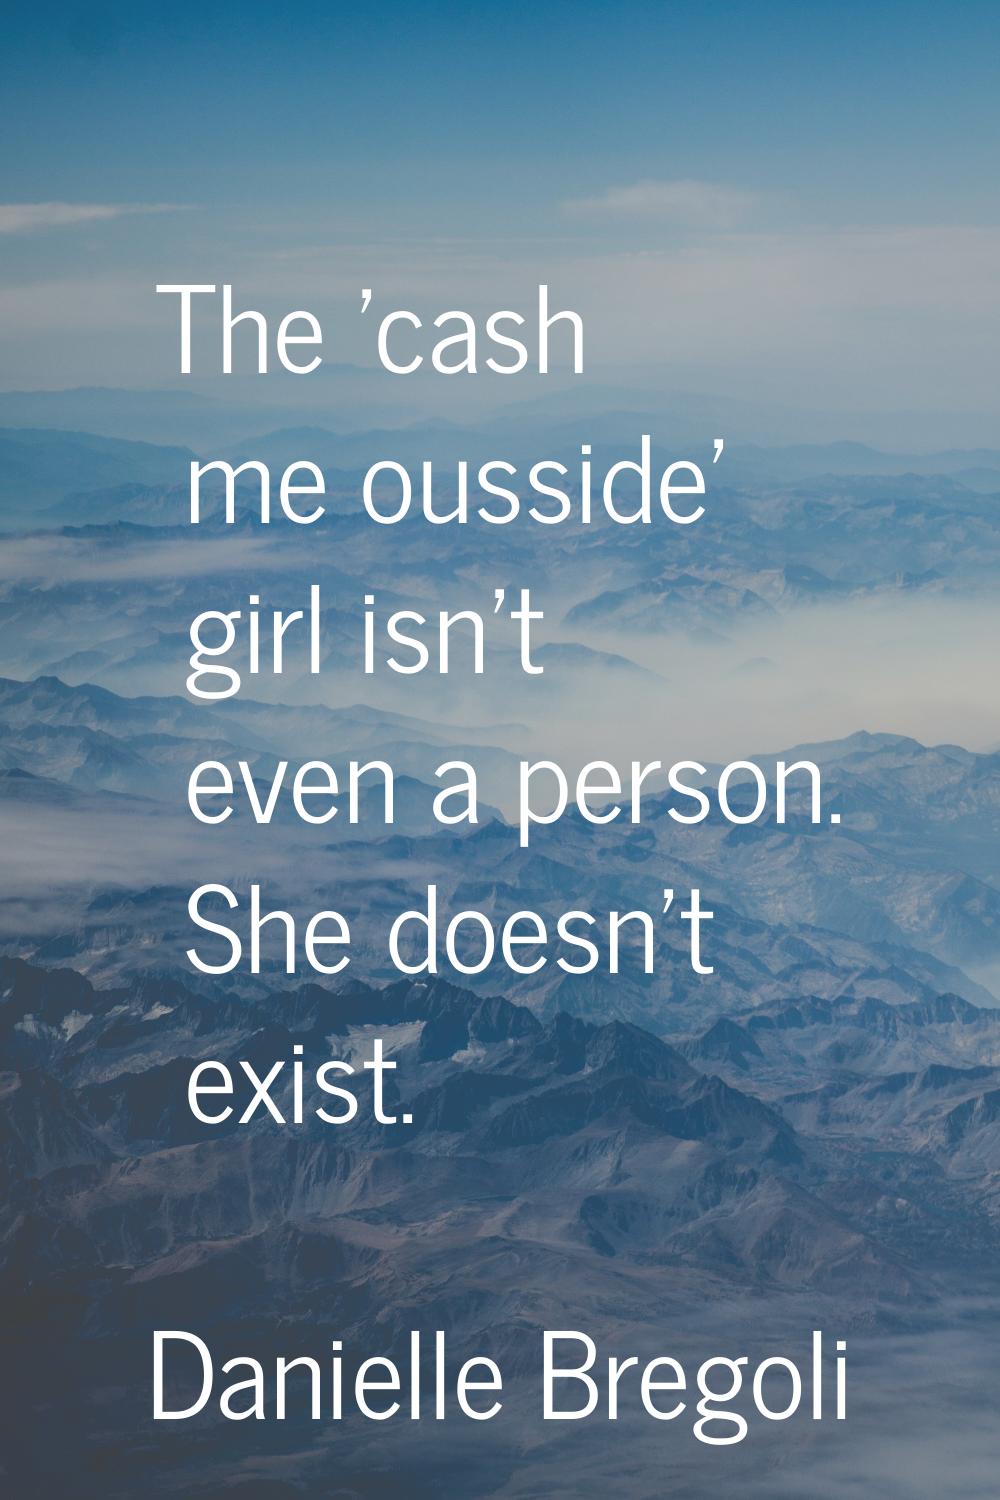 The 'cash me ousside' girl isn't even a person. She doesn't exist.